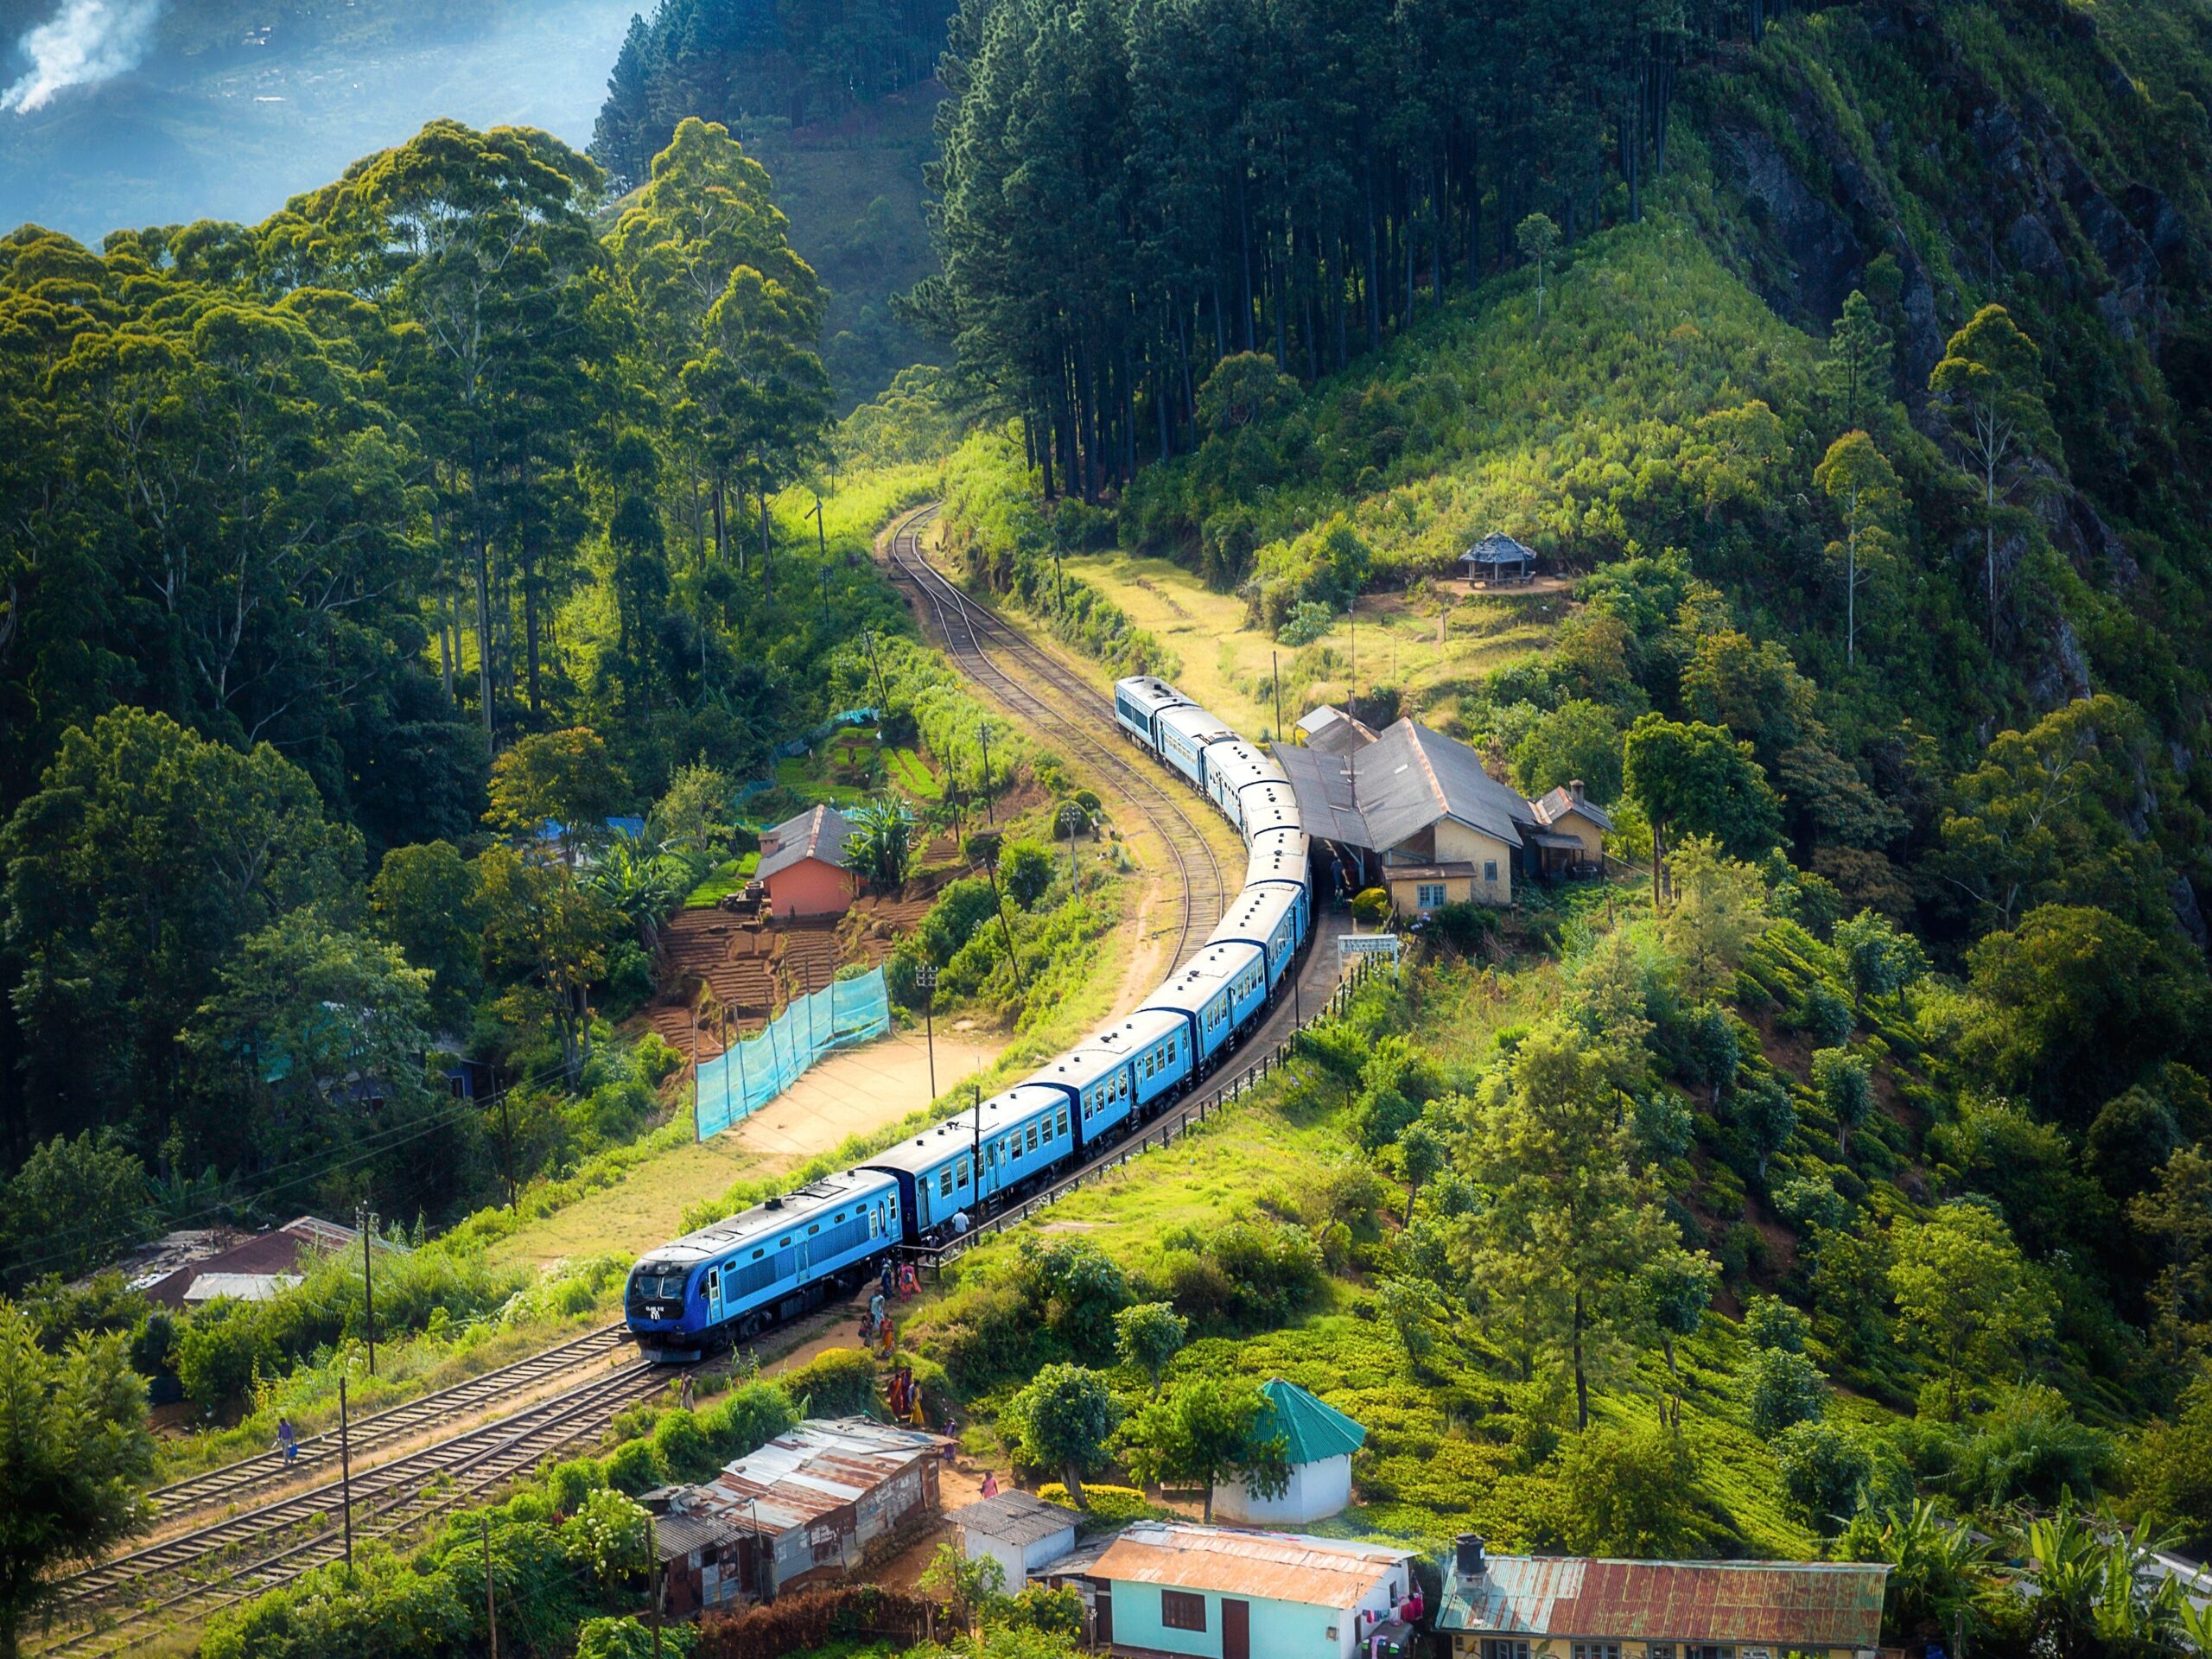 Top 5 magical train rides in India that you NEED to experience